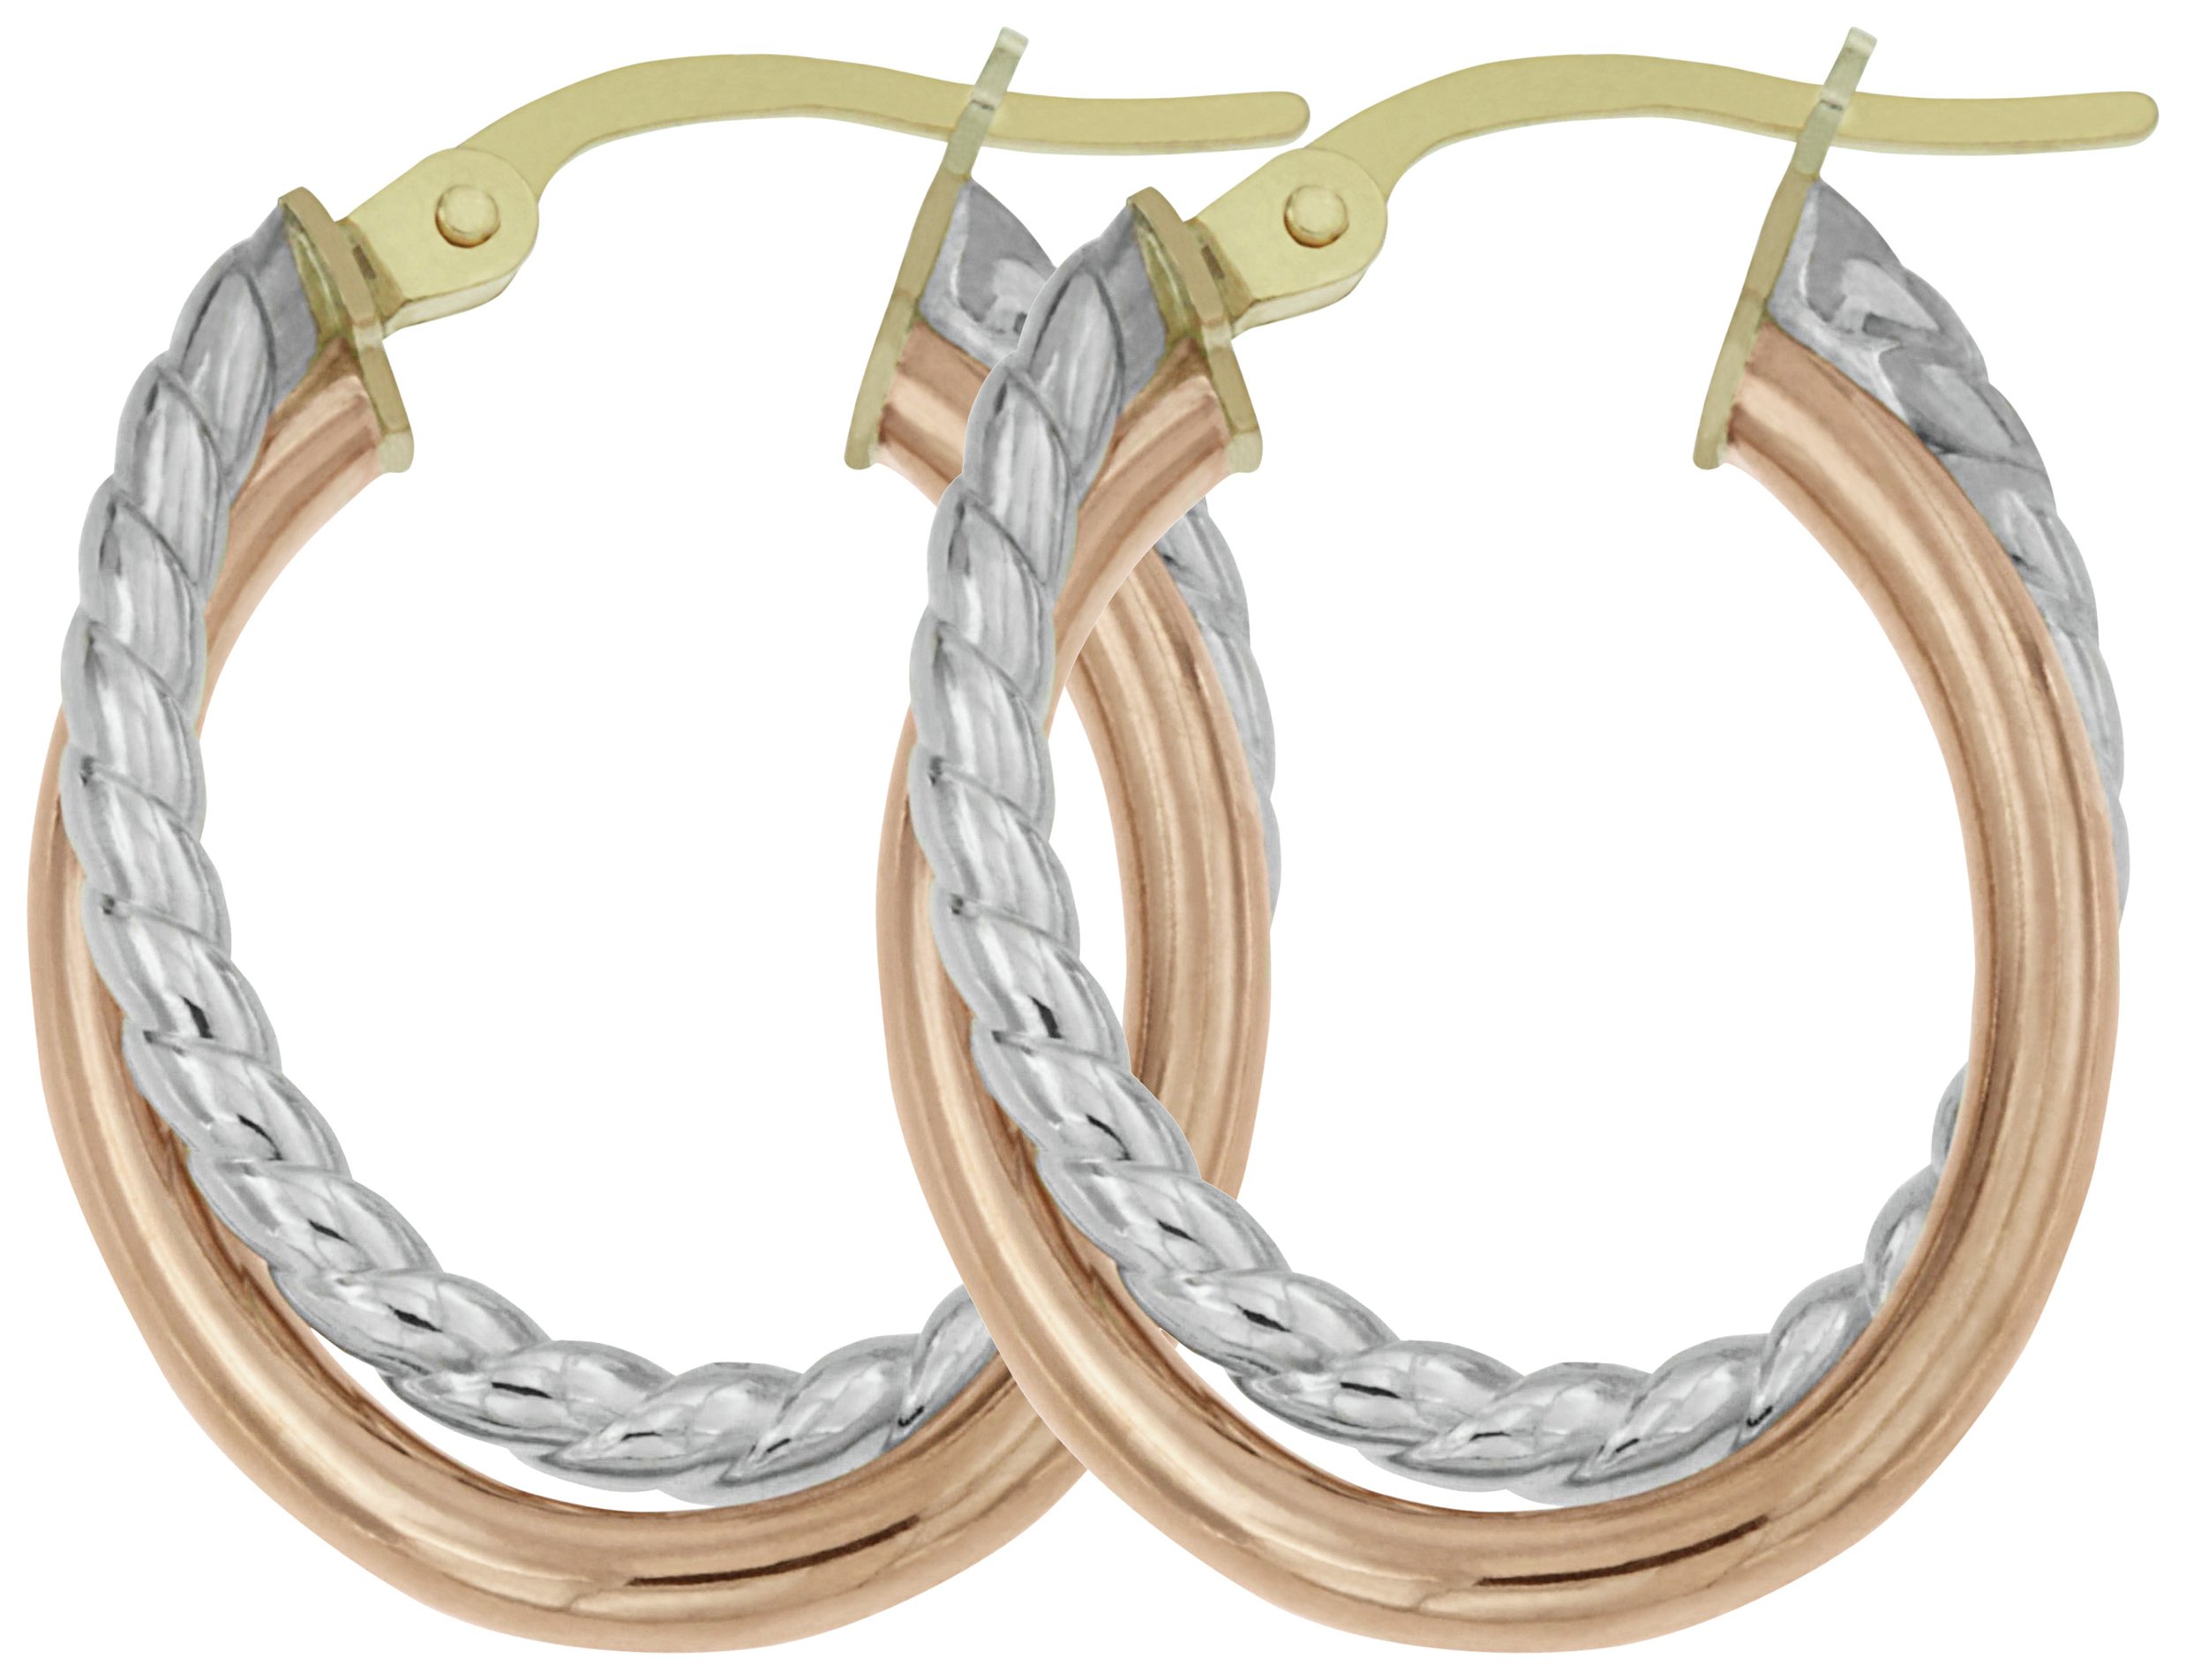 EAN 5055860300048 product image for Bracci 9ct 2 Colour Gold Twist Creole Hoop Earrings | upcitemdb.com